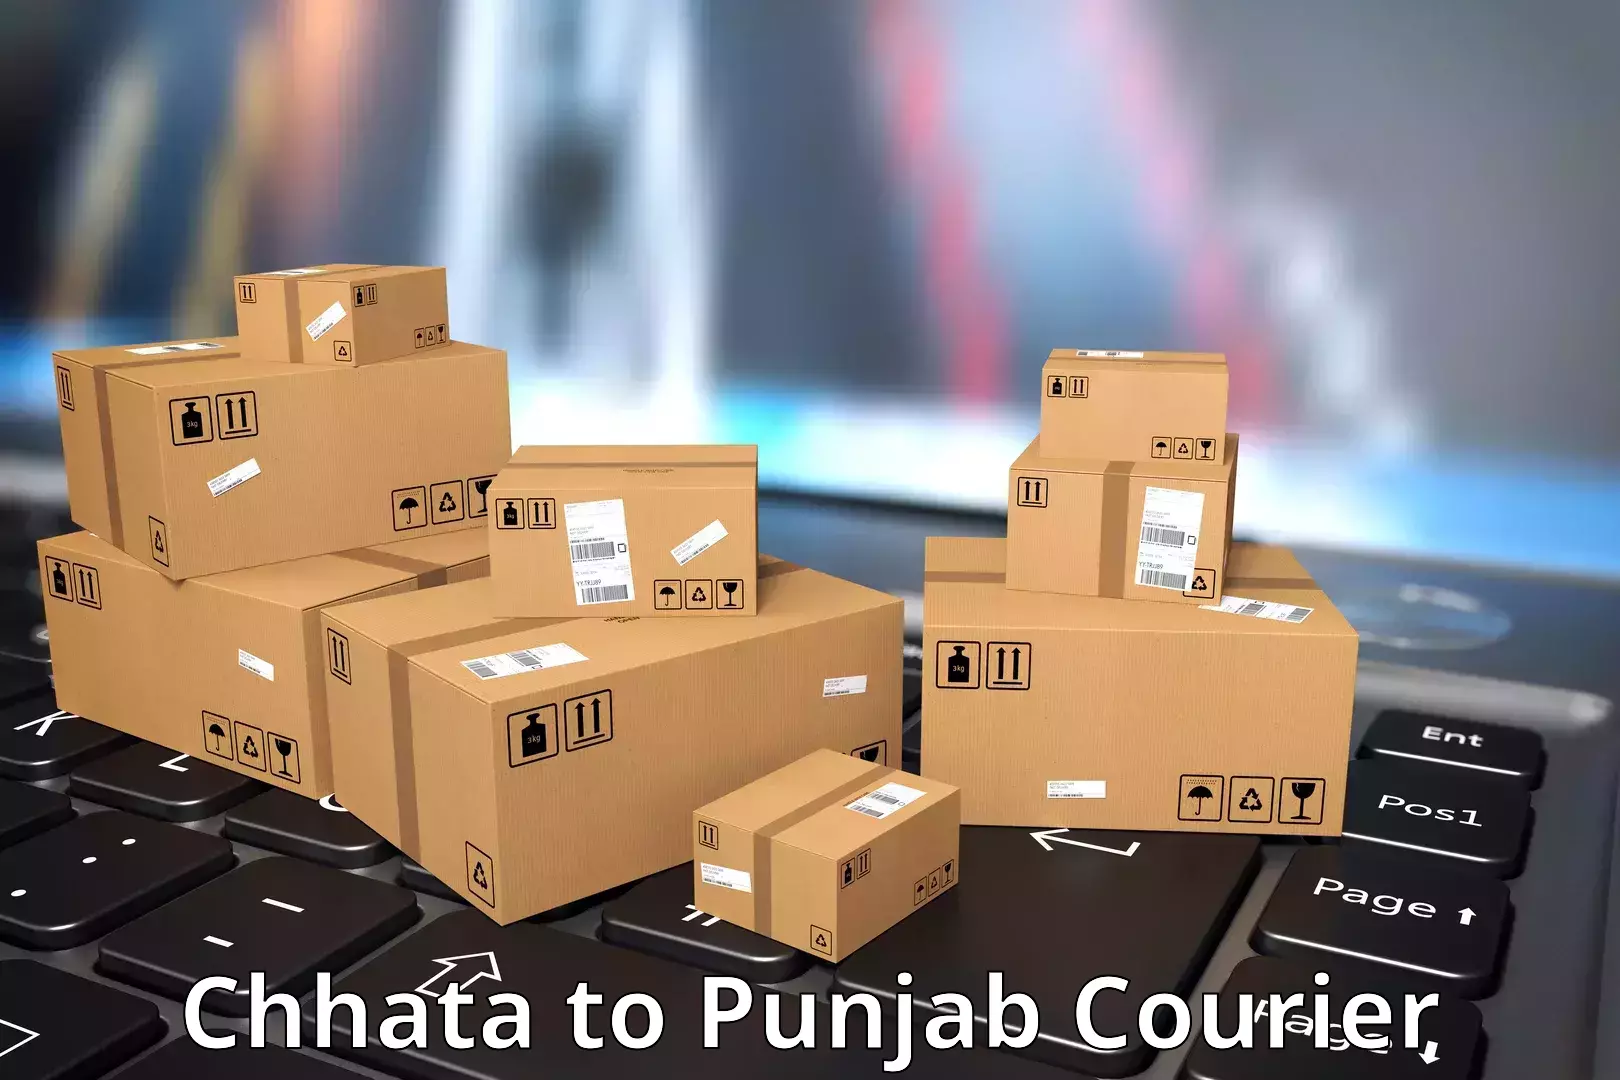 End-to-end delivery Chhata to Amritsar